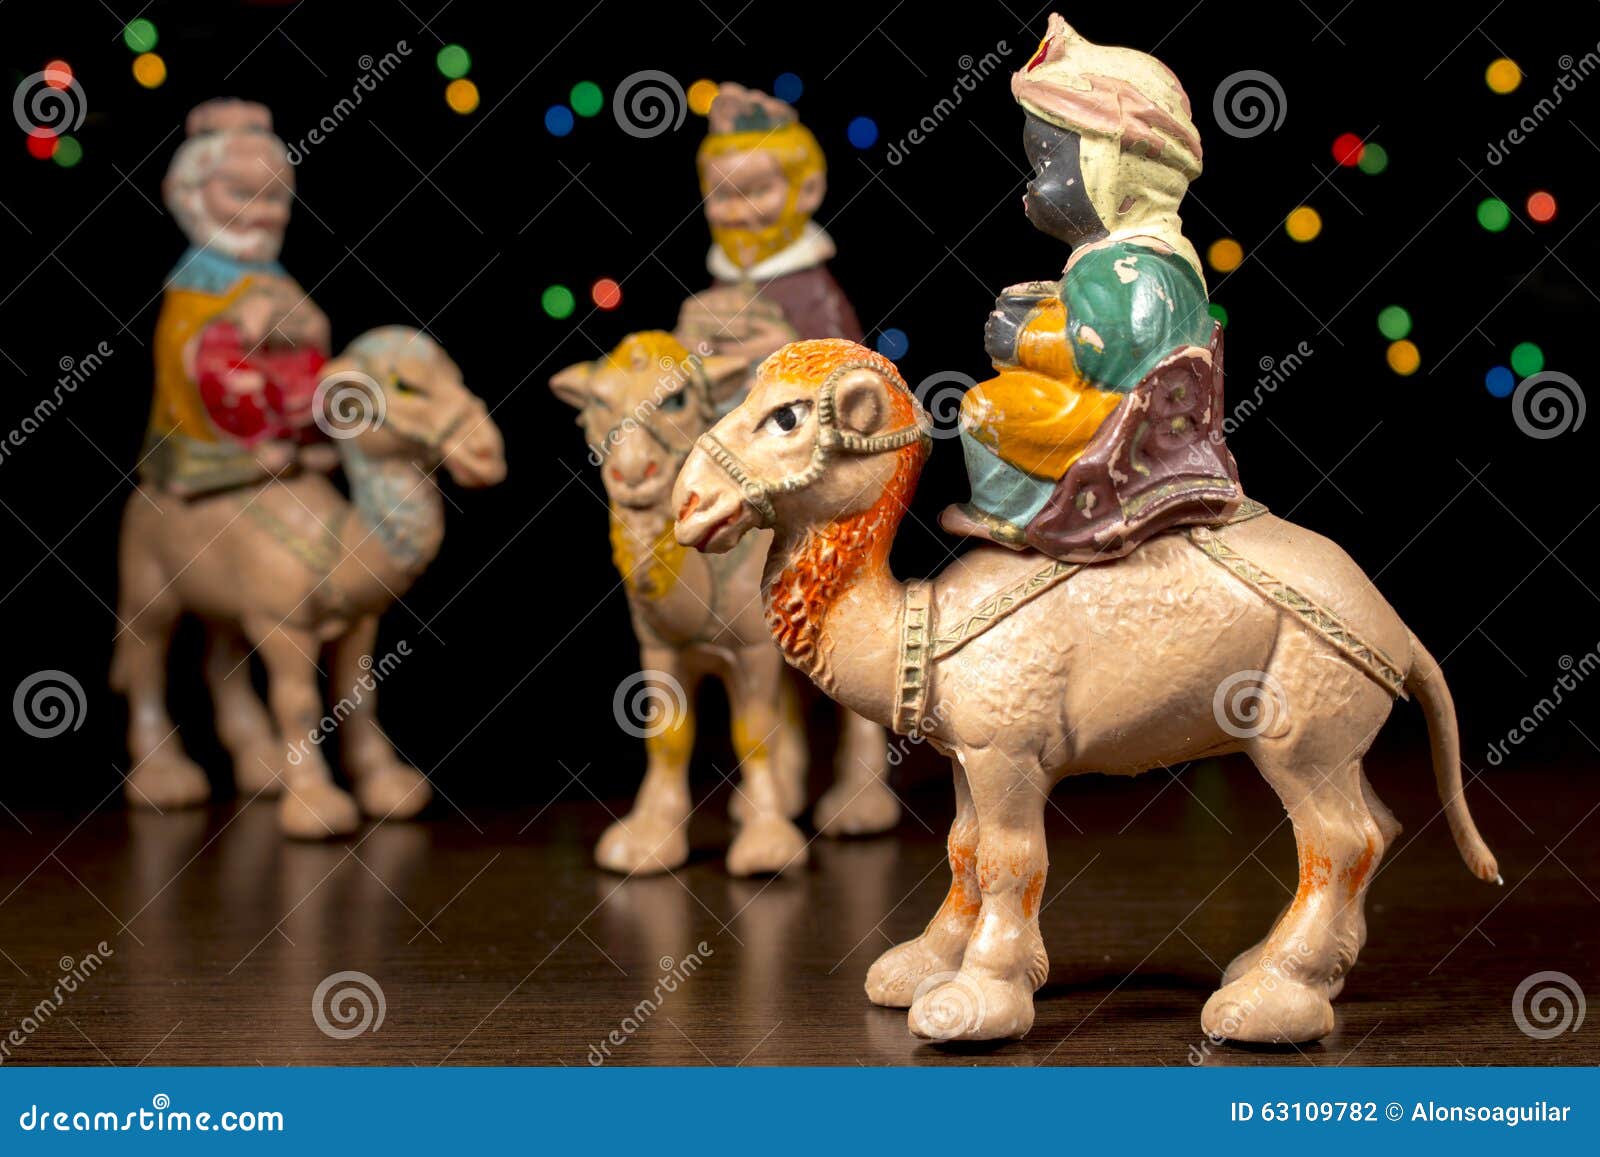 balthazar in front of others magi. nativity scene. christmas traditions.